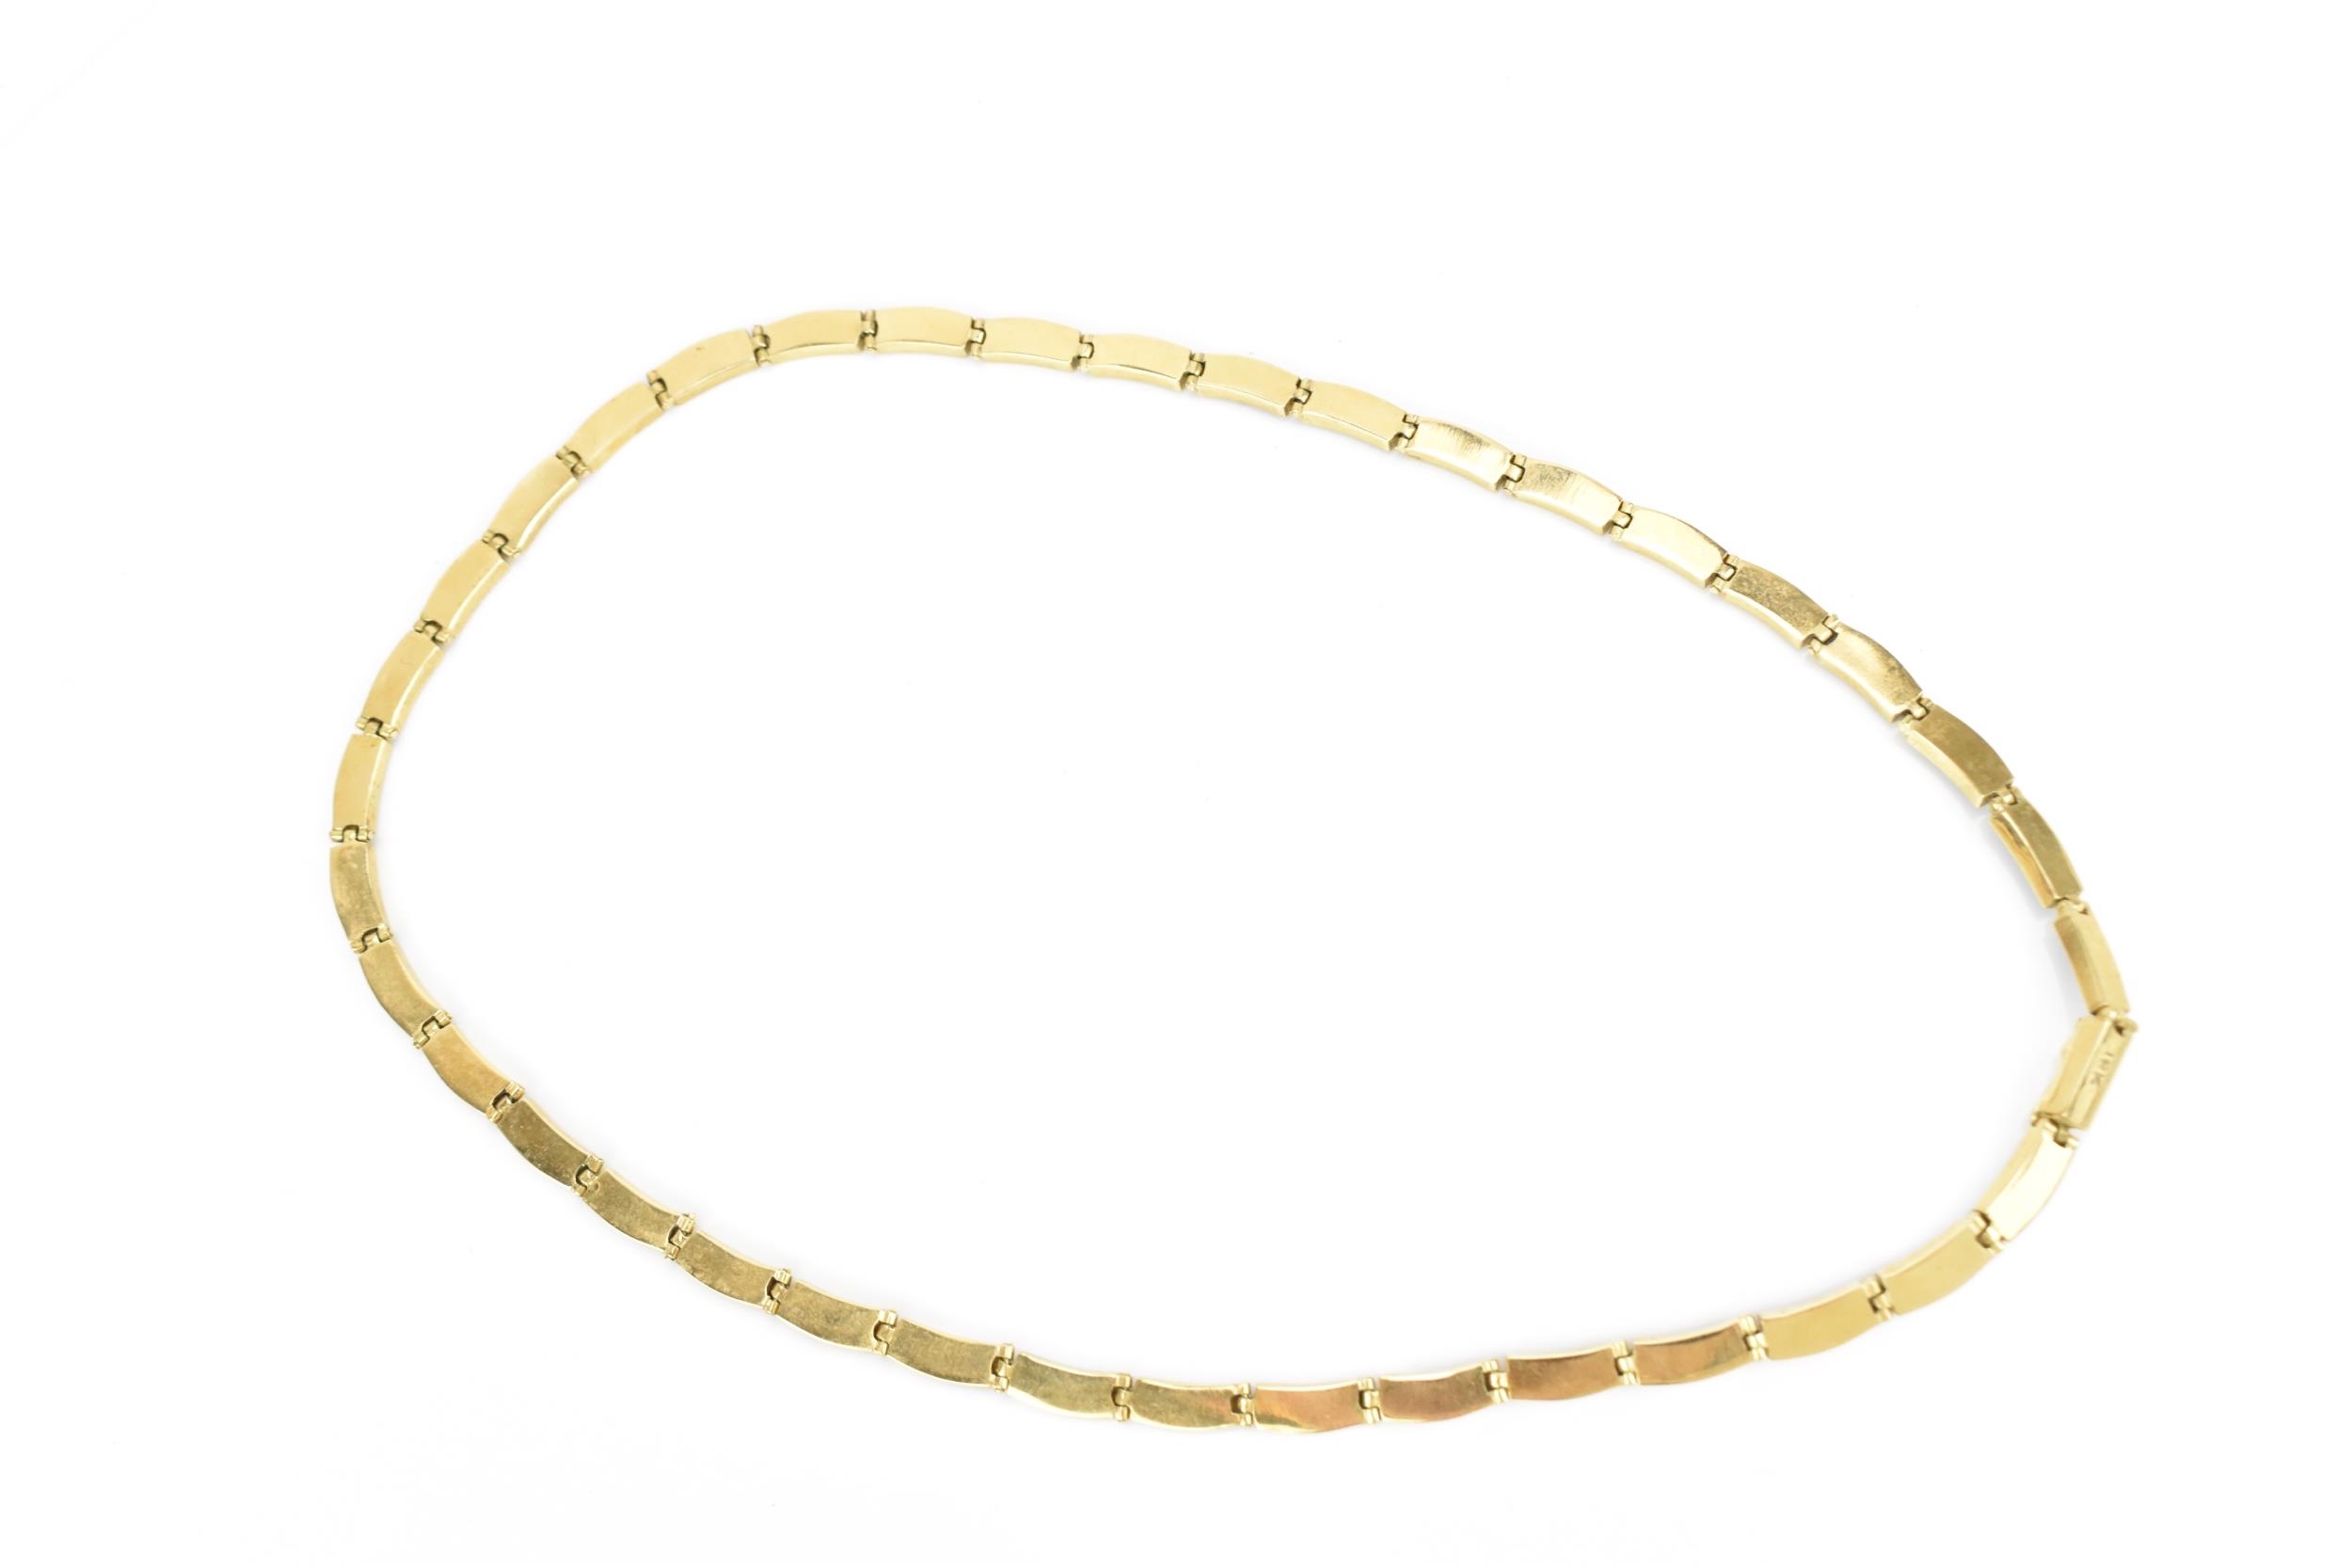 A yellow metal and lapis lazuli necklace, with curved rectangular links each inset with lazuli - Image 4 of 5